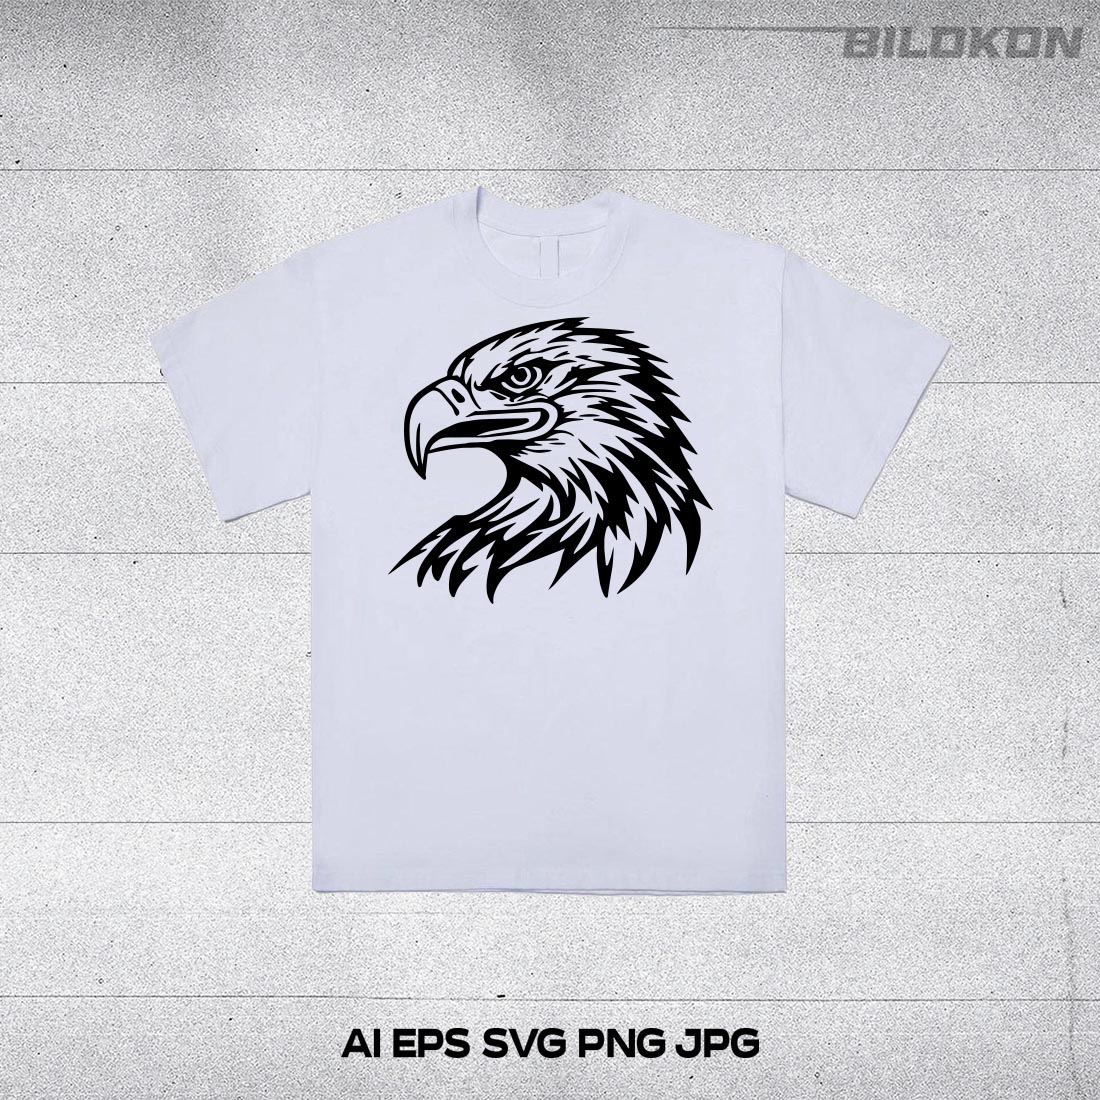 White t - shirt with a black eagle on it.